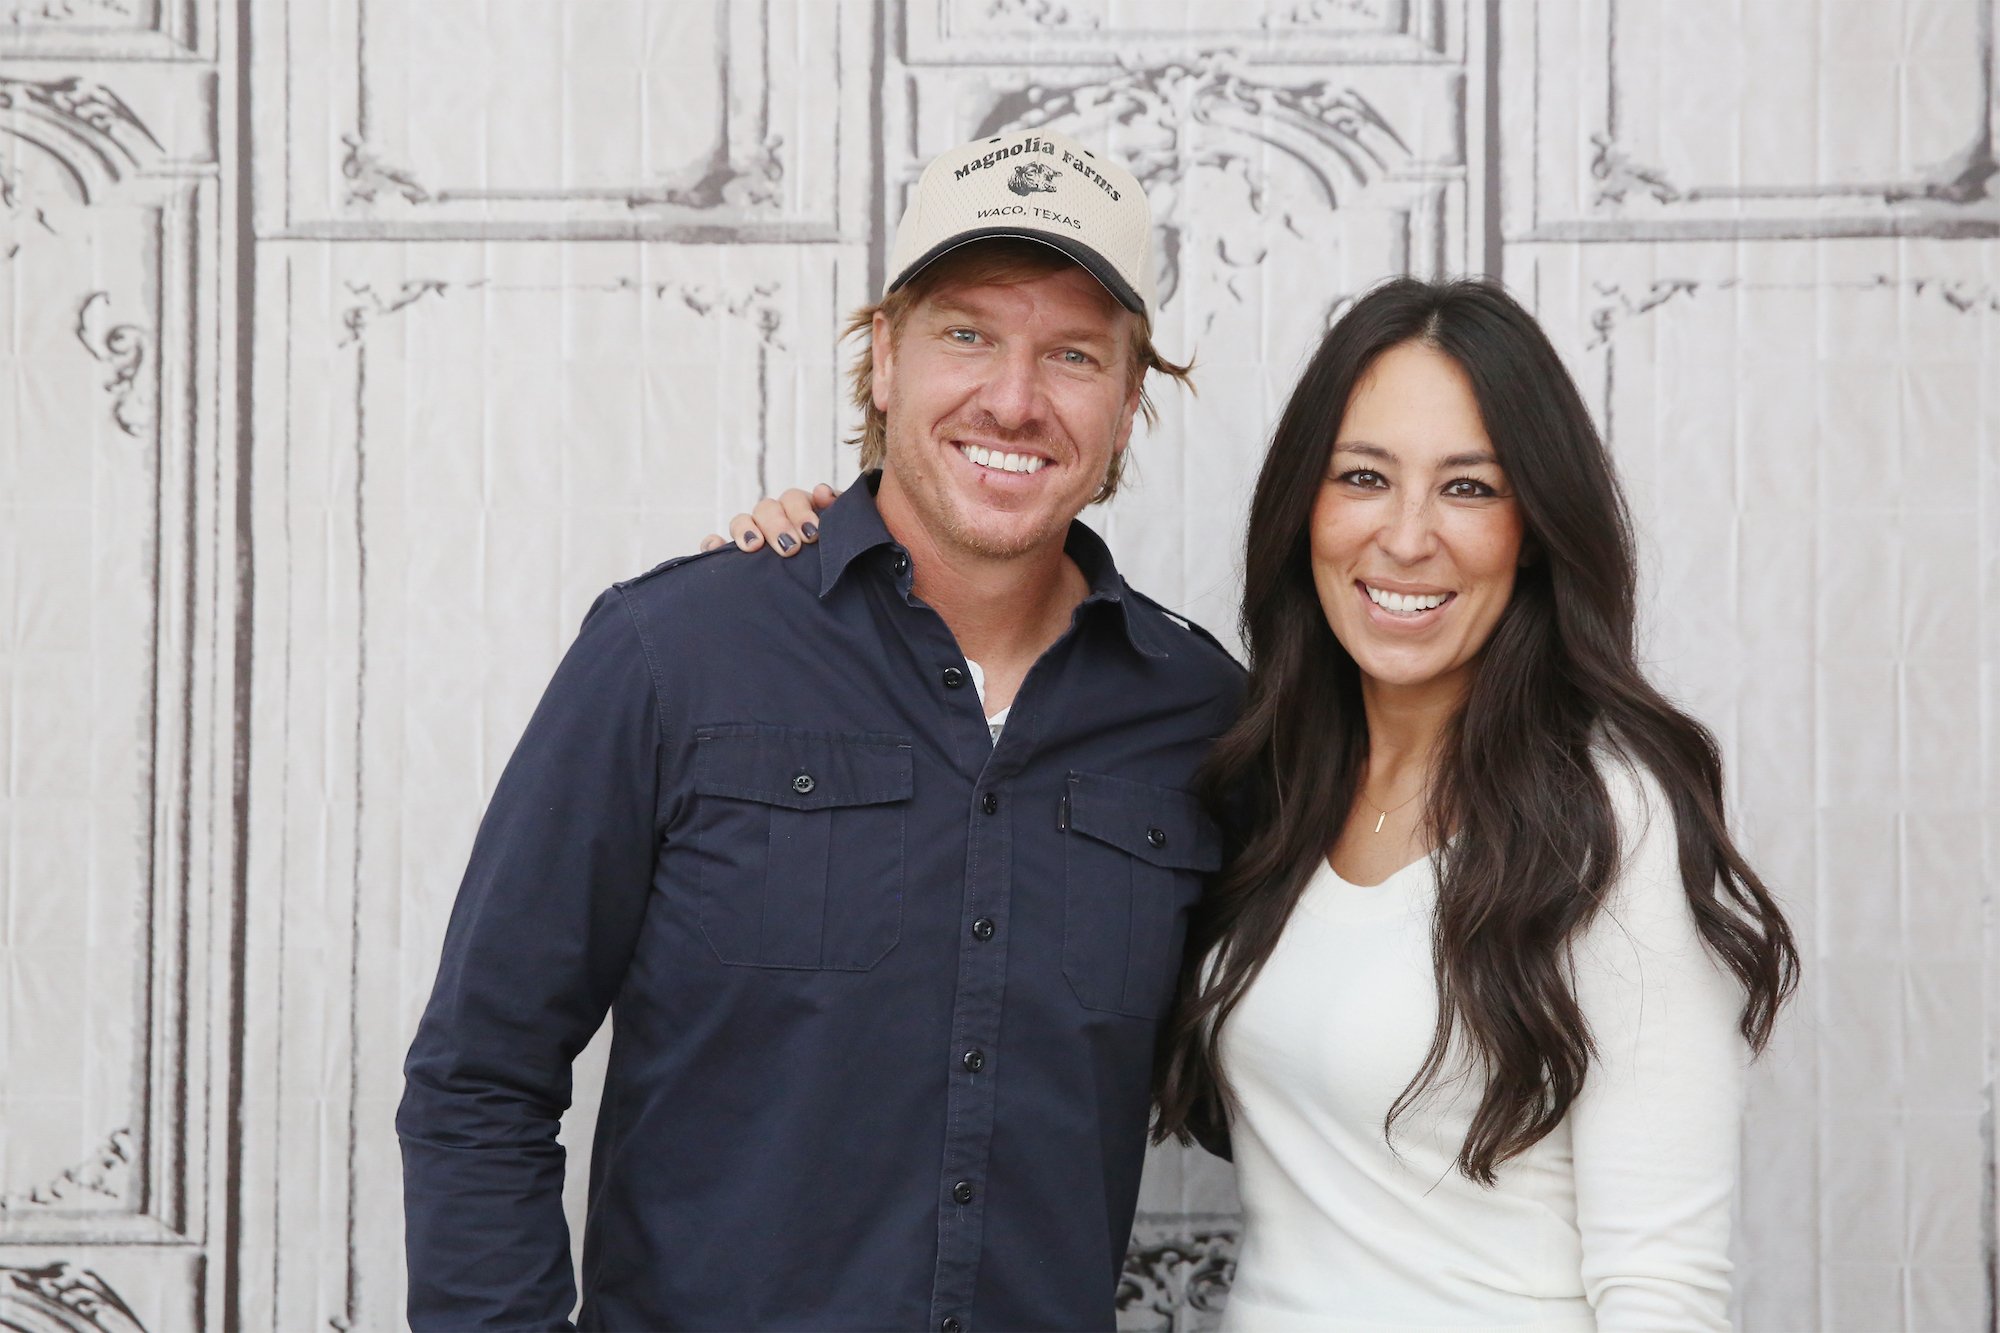 Chip and Joanna Gaines smile at an AOL event, with Chip wearing a dark button down shirt and hat and Joanna wearing a white top.